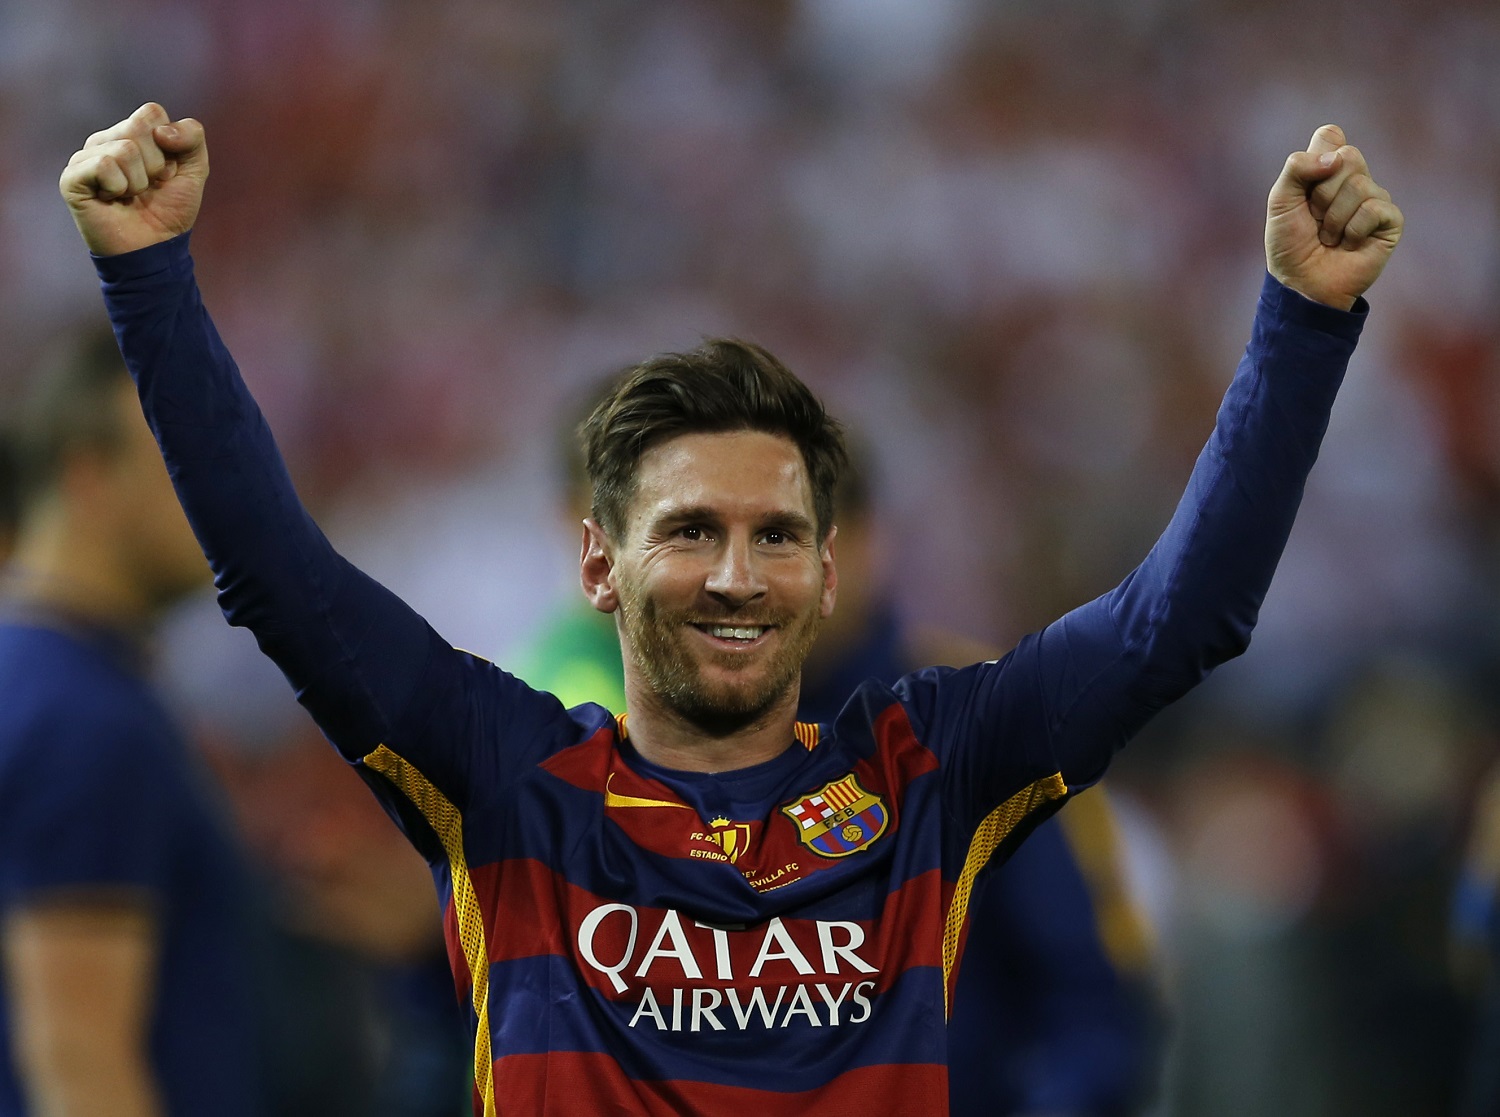 Barcelona's Lionel Messi celebrates after winning the final of the Copa del Rey soccer match between FC Barcelona and Sevilla FC at the Vicente Calderon stadium in Madrid, Sunday, May 22, 2016. Barcelona won 2-0 (AP Photo/Francisco Seco)